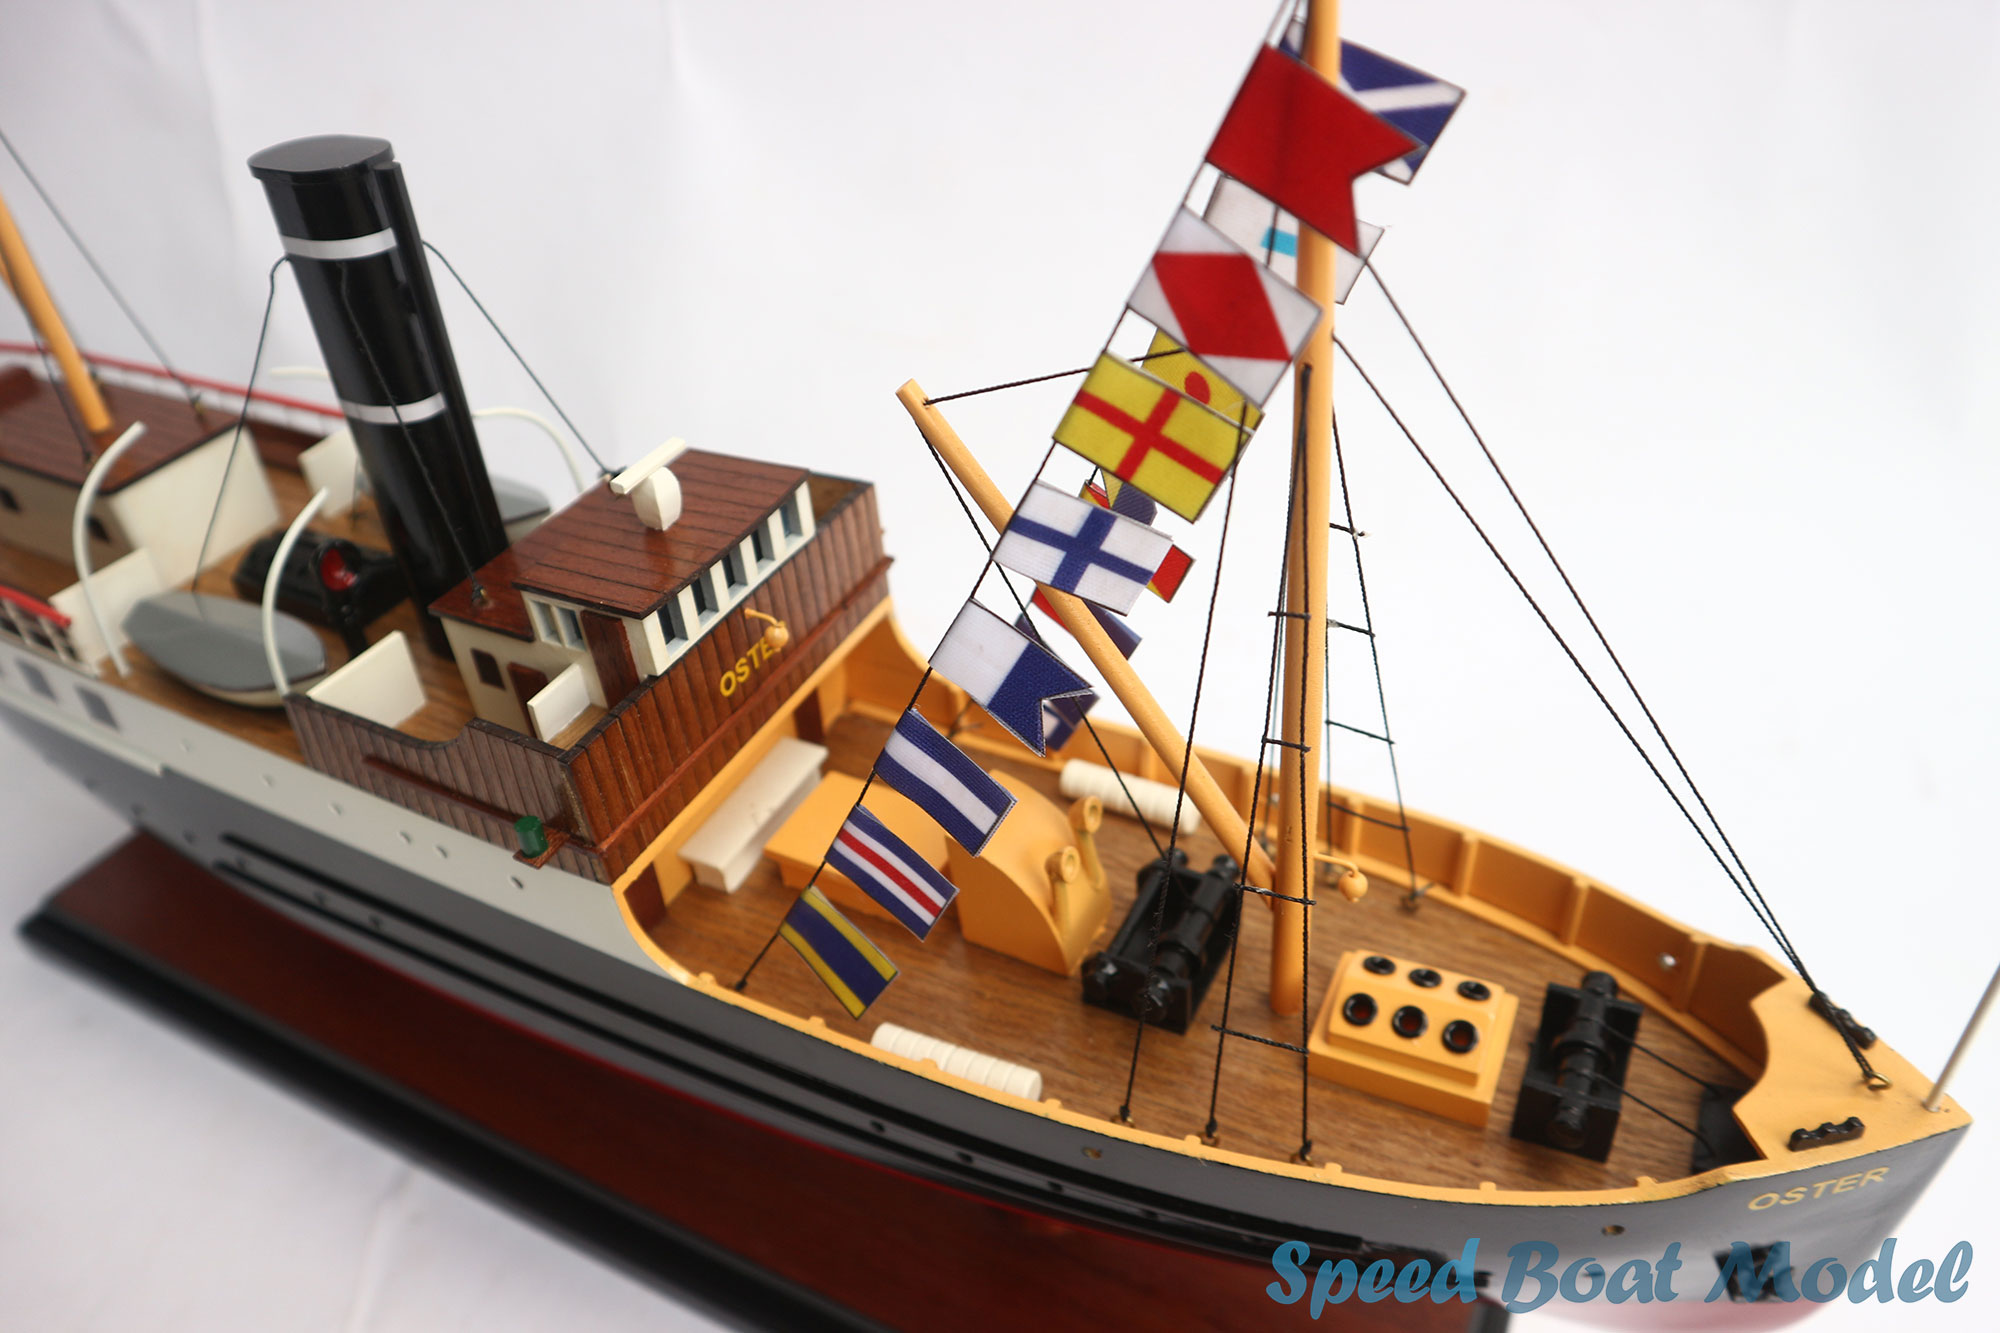 Oster With Signal Flags Tall Ship Model 20.47